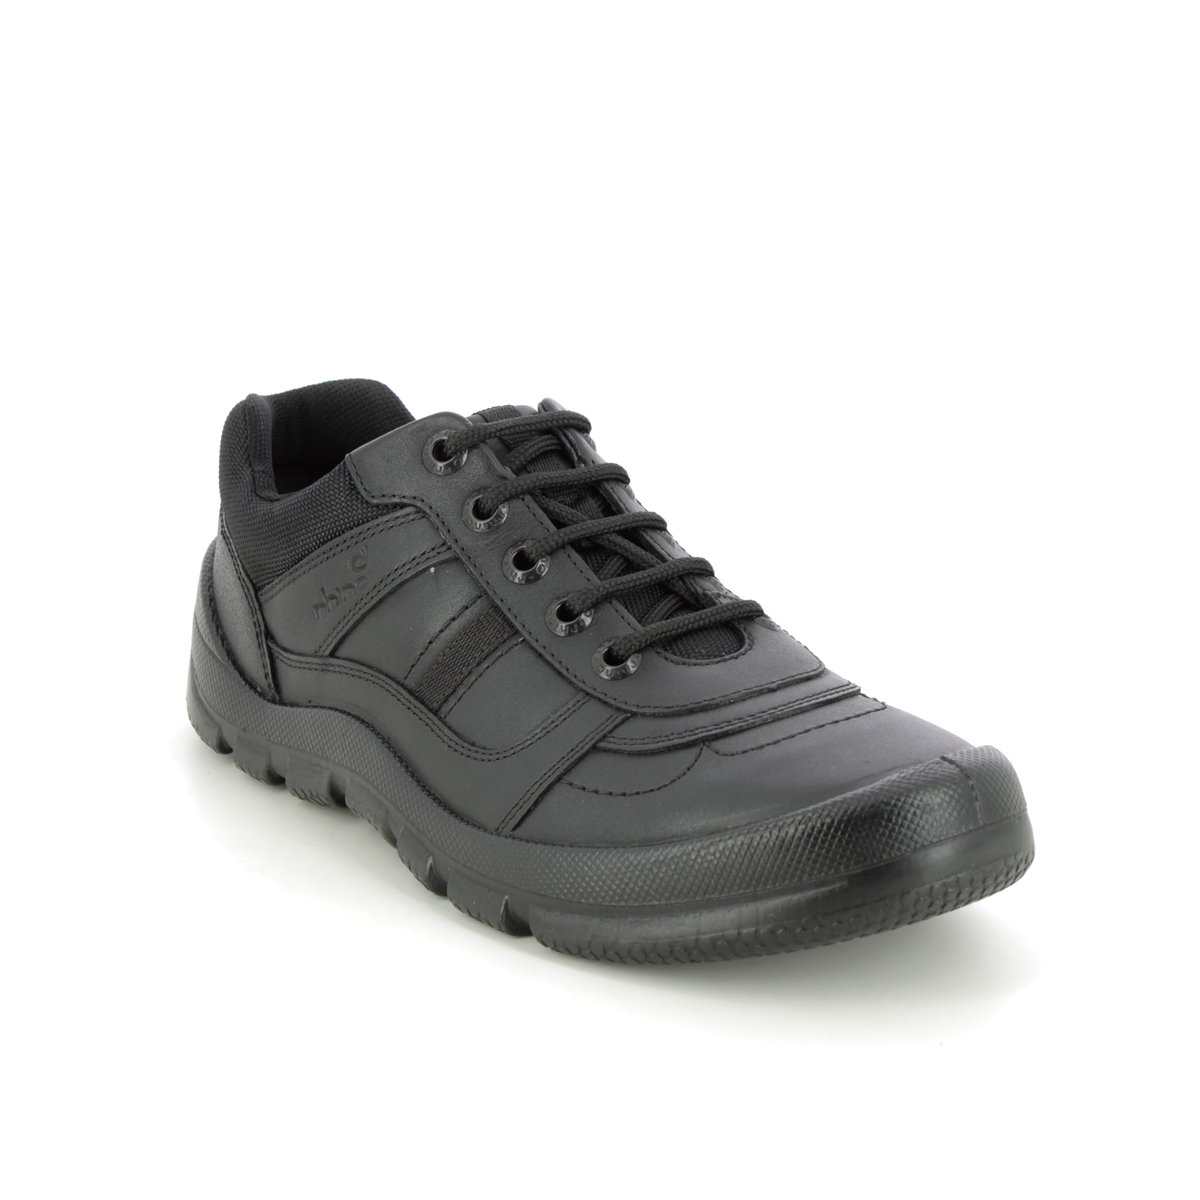 Start Rite - Rhino Warrior Lace In Black Leather 8238-76F In Size 6 In Plain Black Leather For School Boys Shoes  In Black Leather For kids